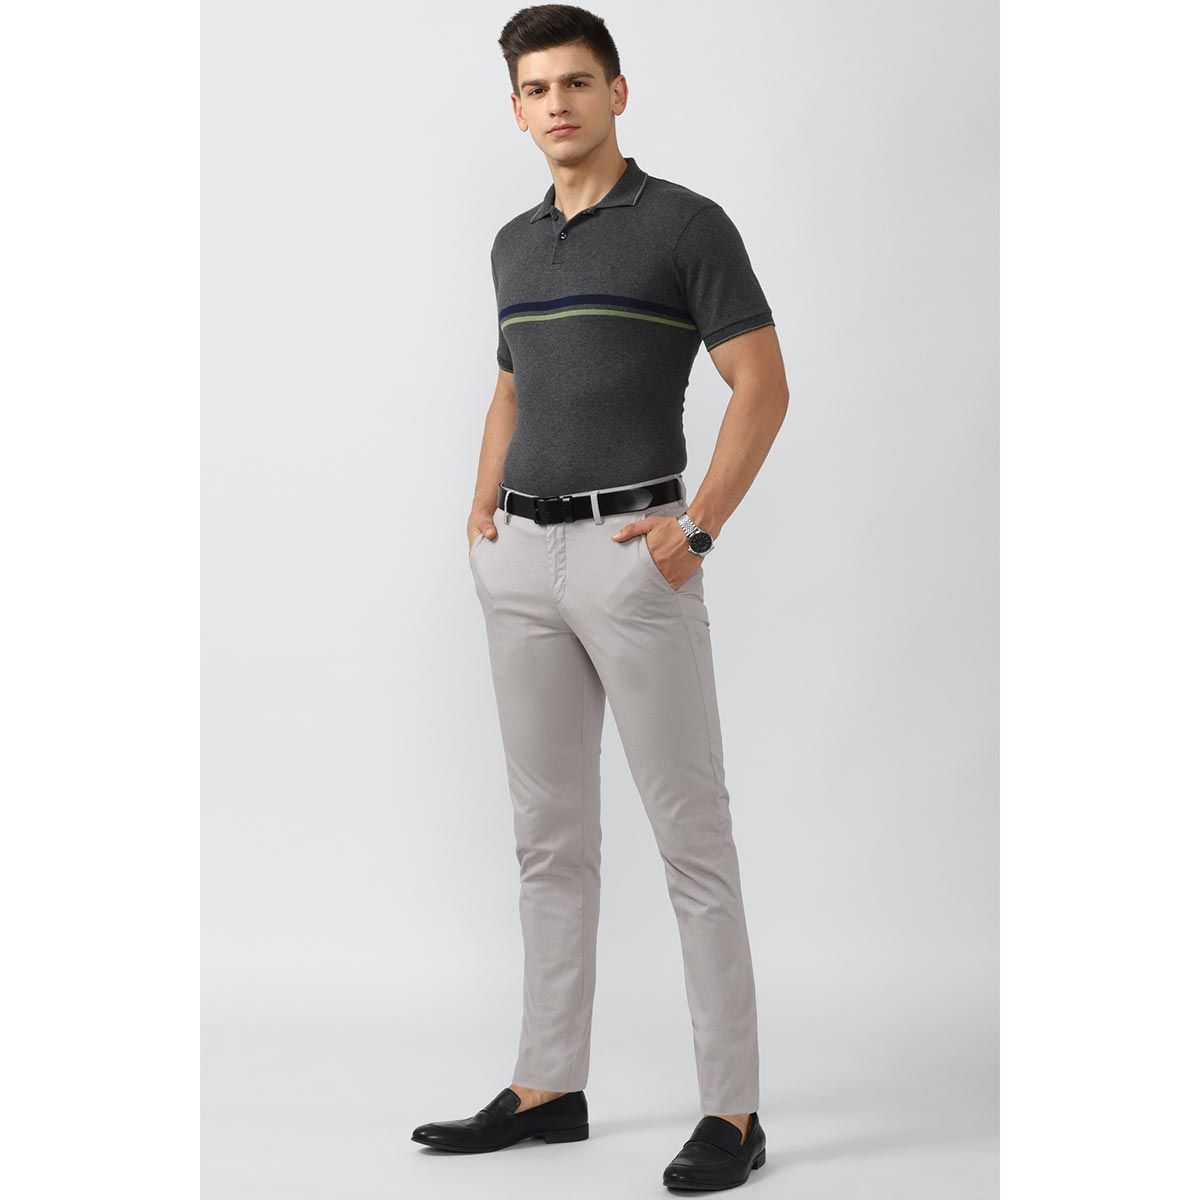 Peter England Casuals Trousers  Buy Peter England Casuals Trousers Online  In India